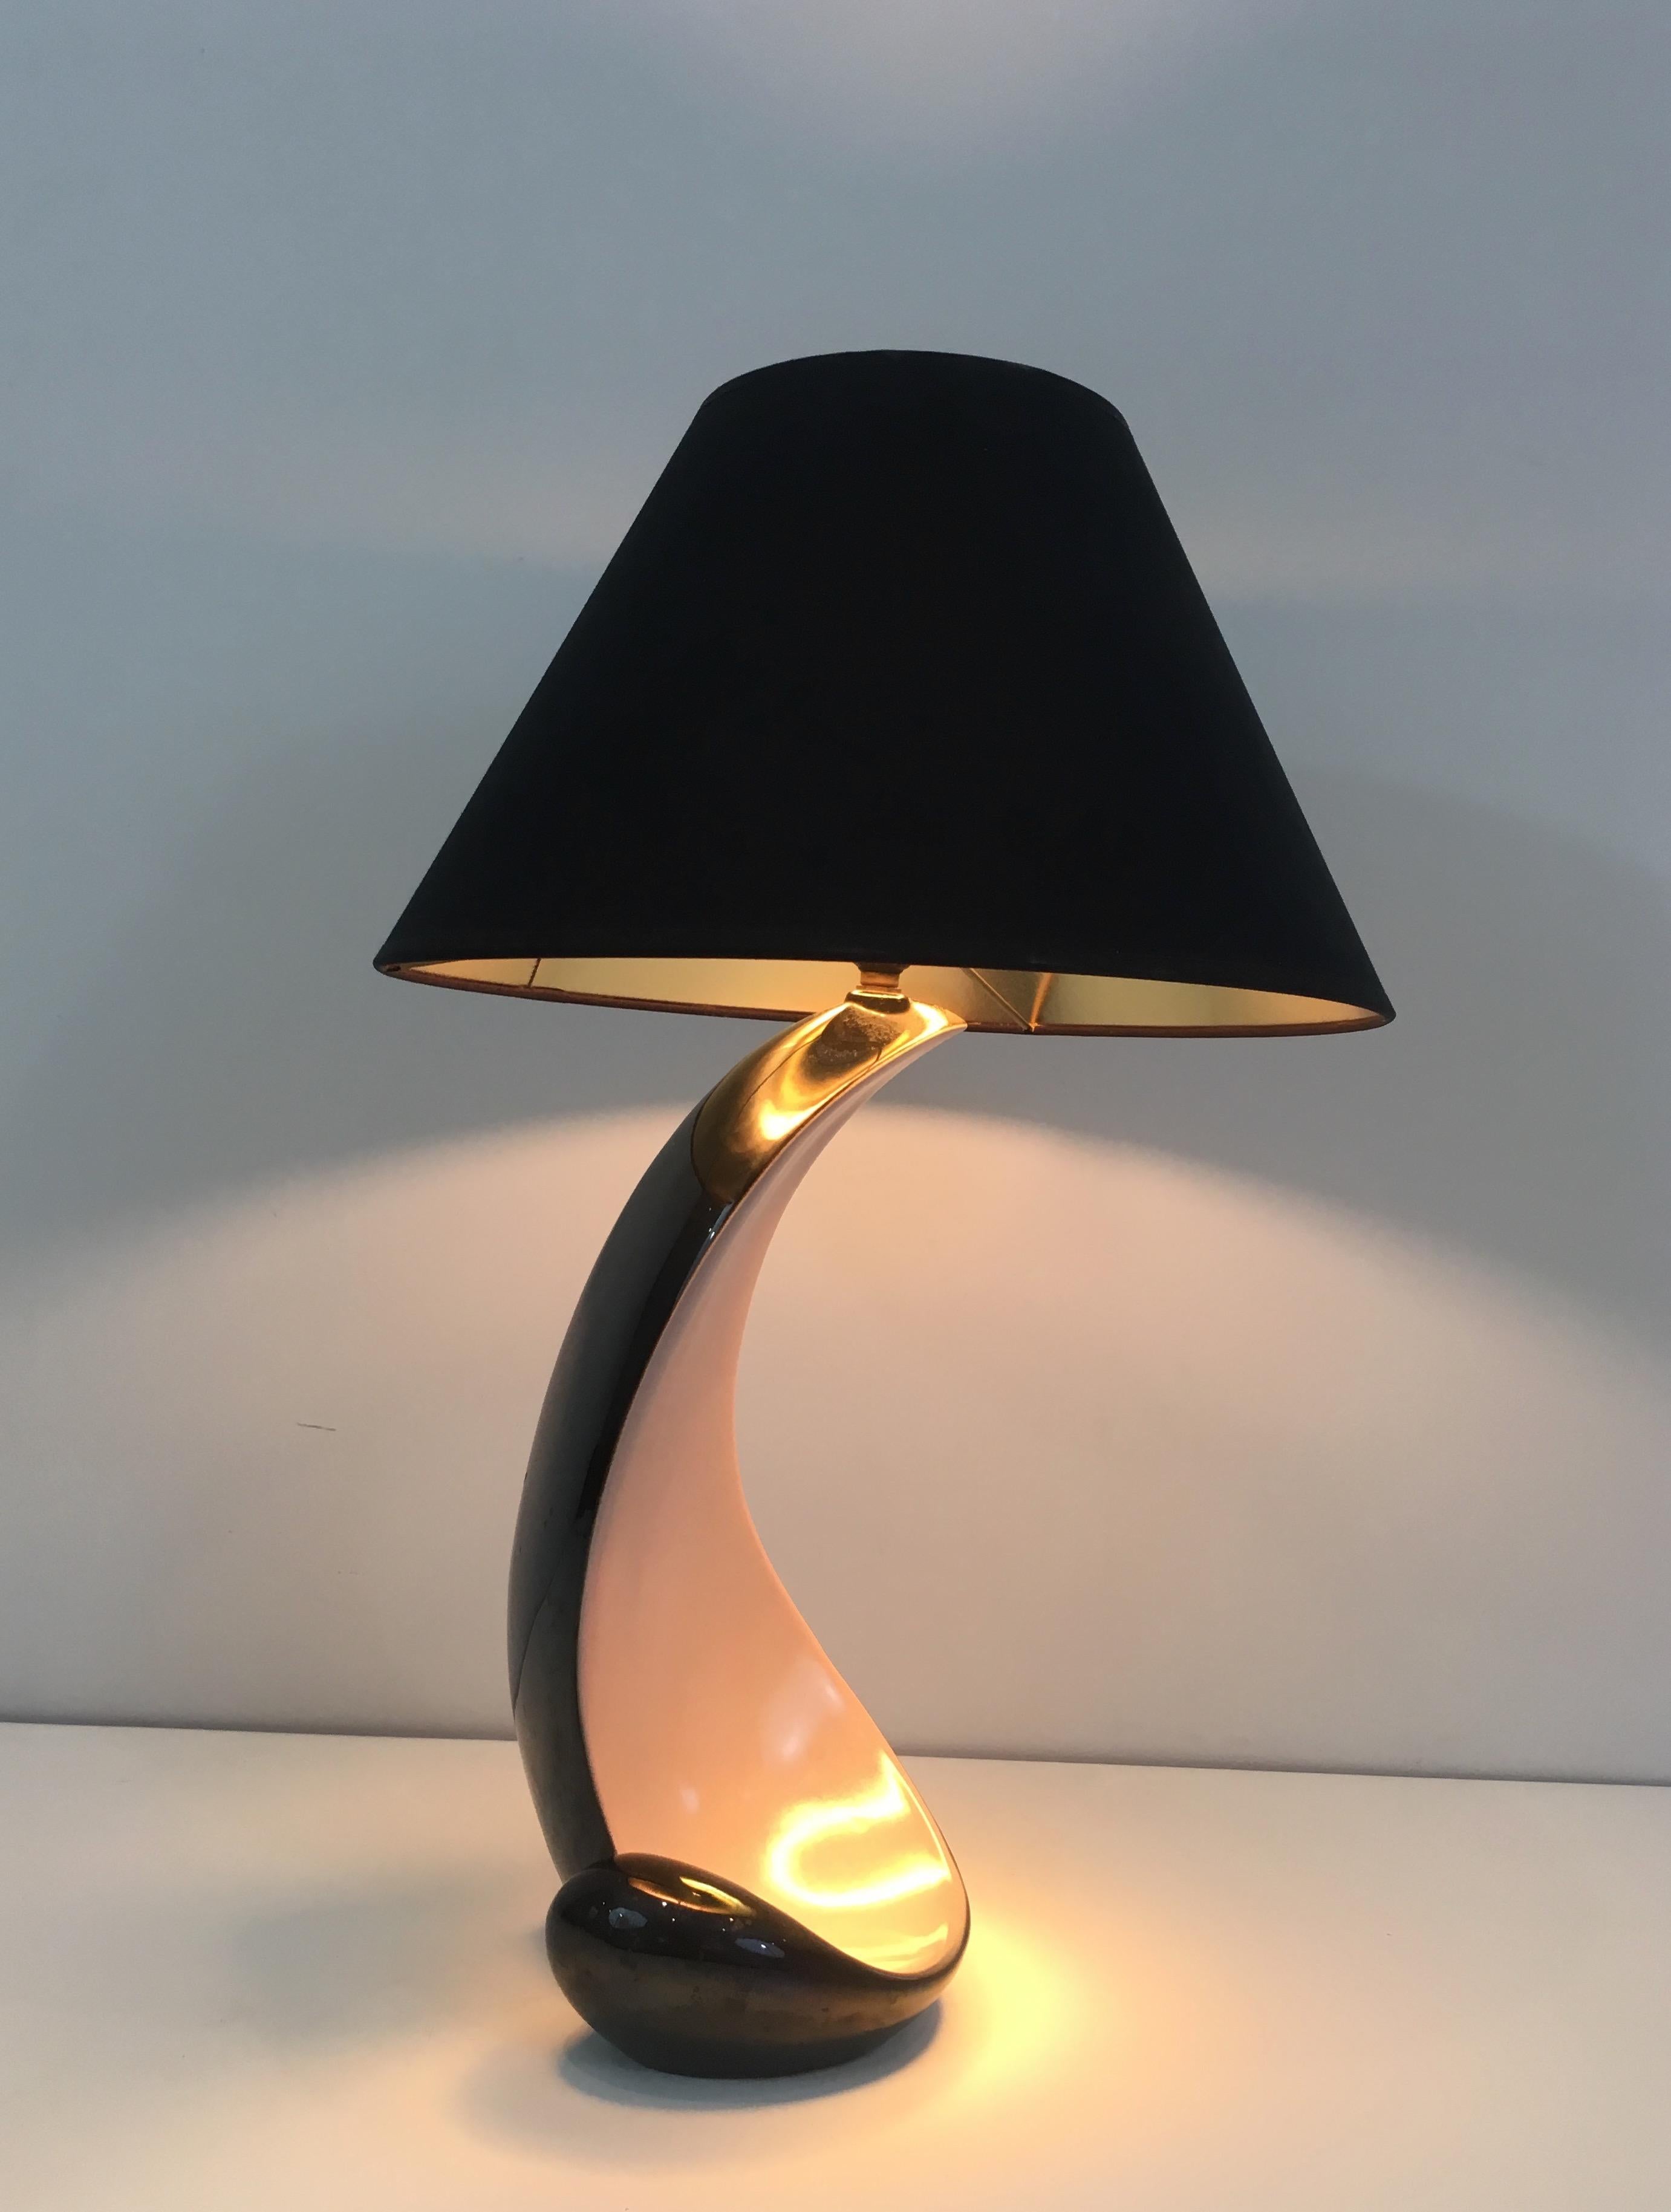 Mid-Century Modern Design Ceramic Table Lamp, French, circa 1950 For Sale